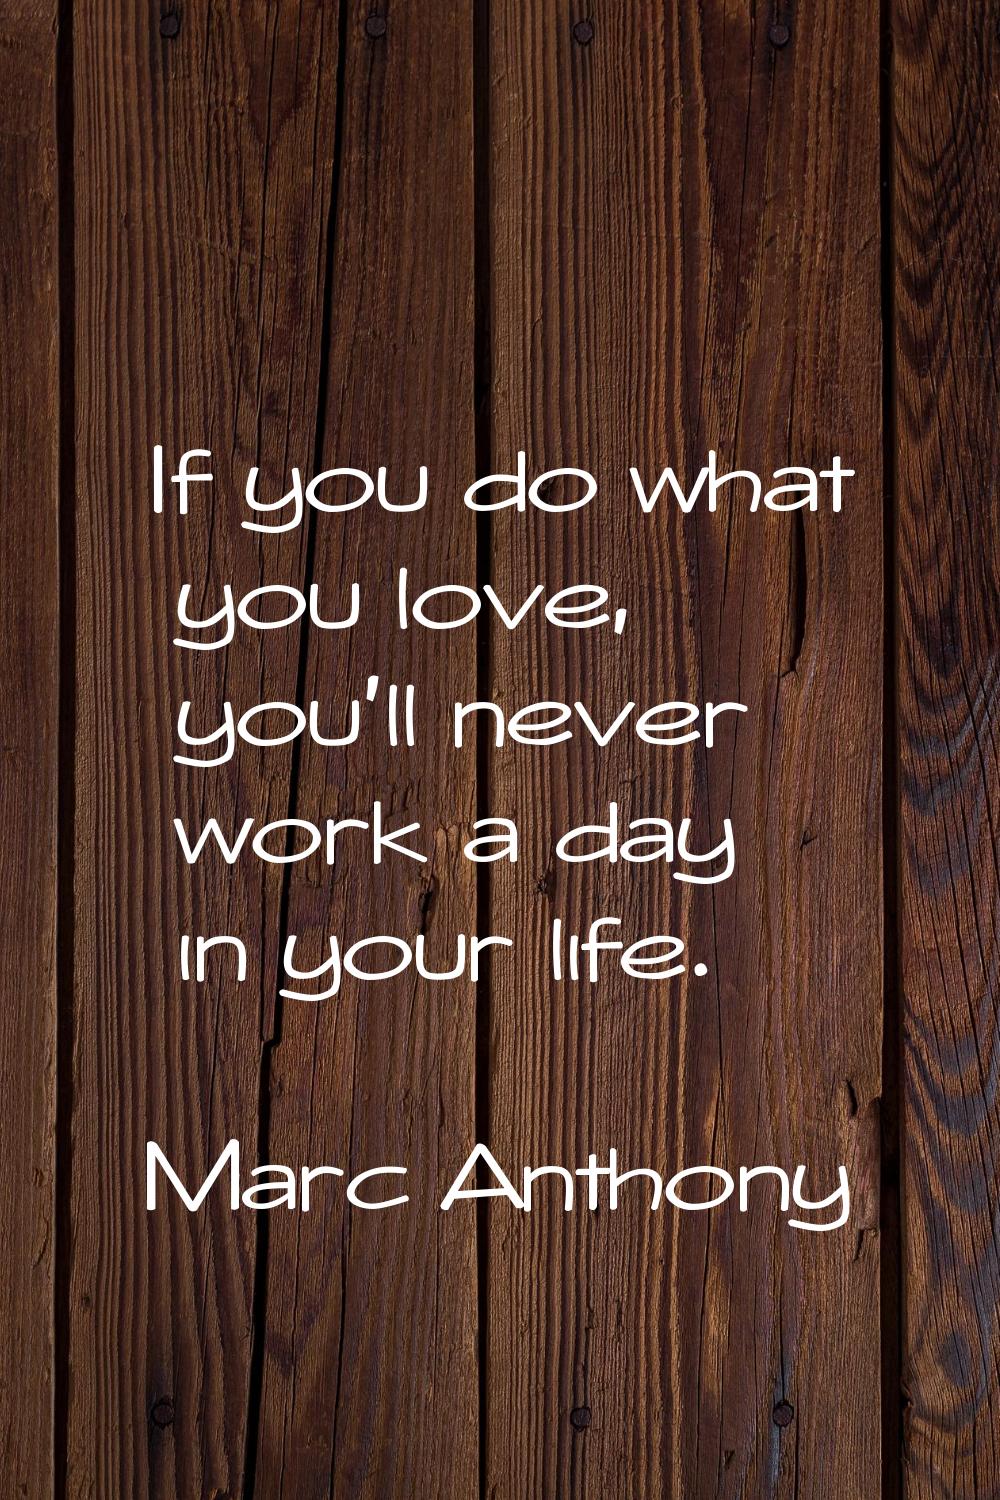 If you do what you love, you'll never work a day in your life.